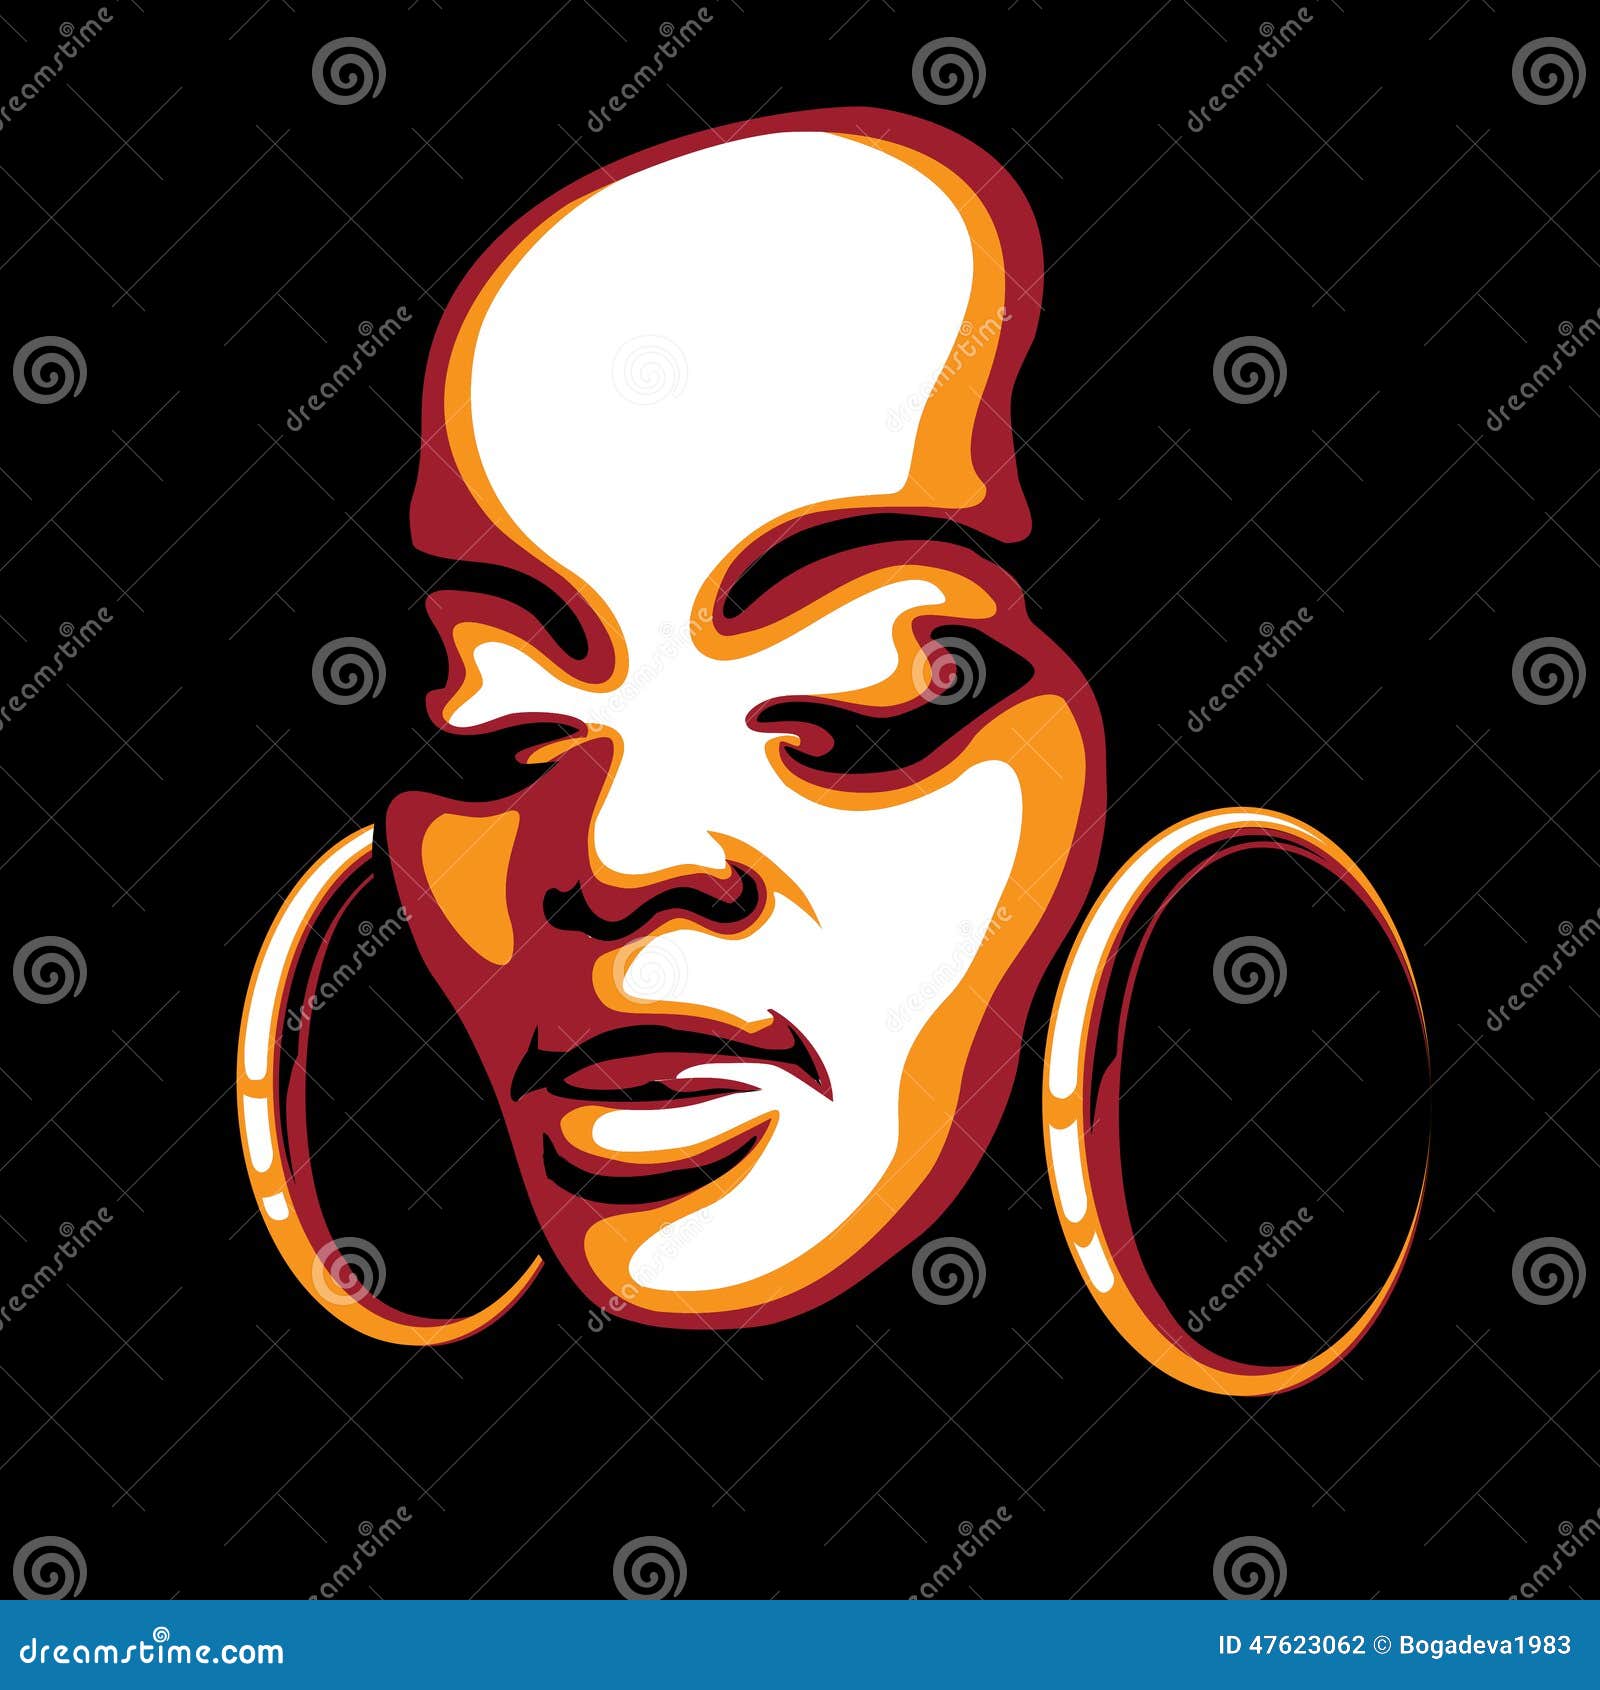 African Woman Face Stock Vector - Image: 47623062